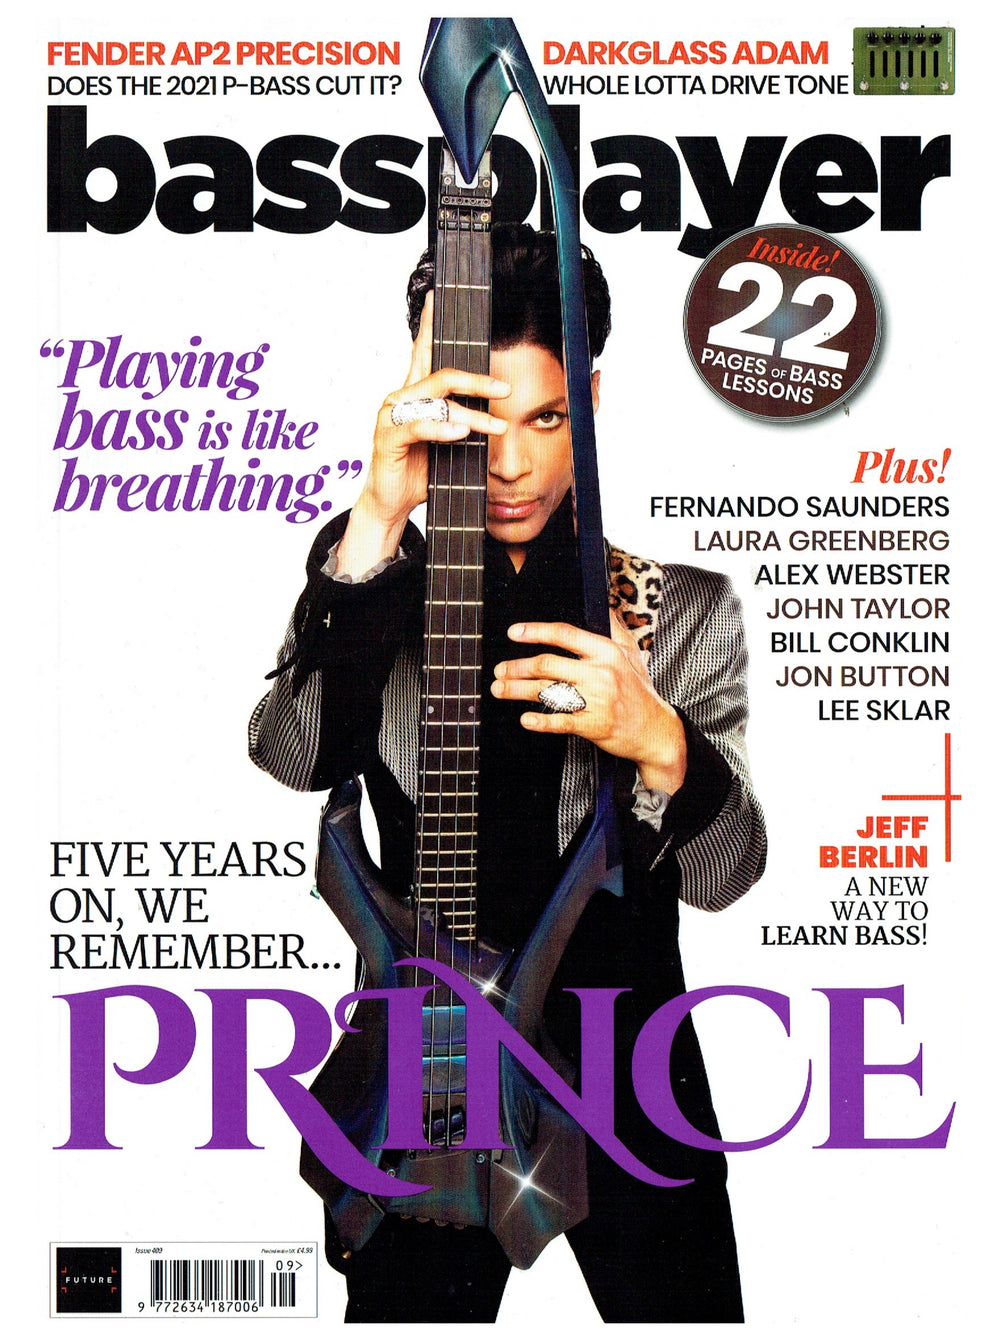 Prince Bass Player Magazine UK Issue 409 Front Cover & 11 Pages